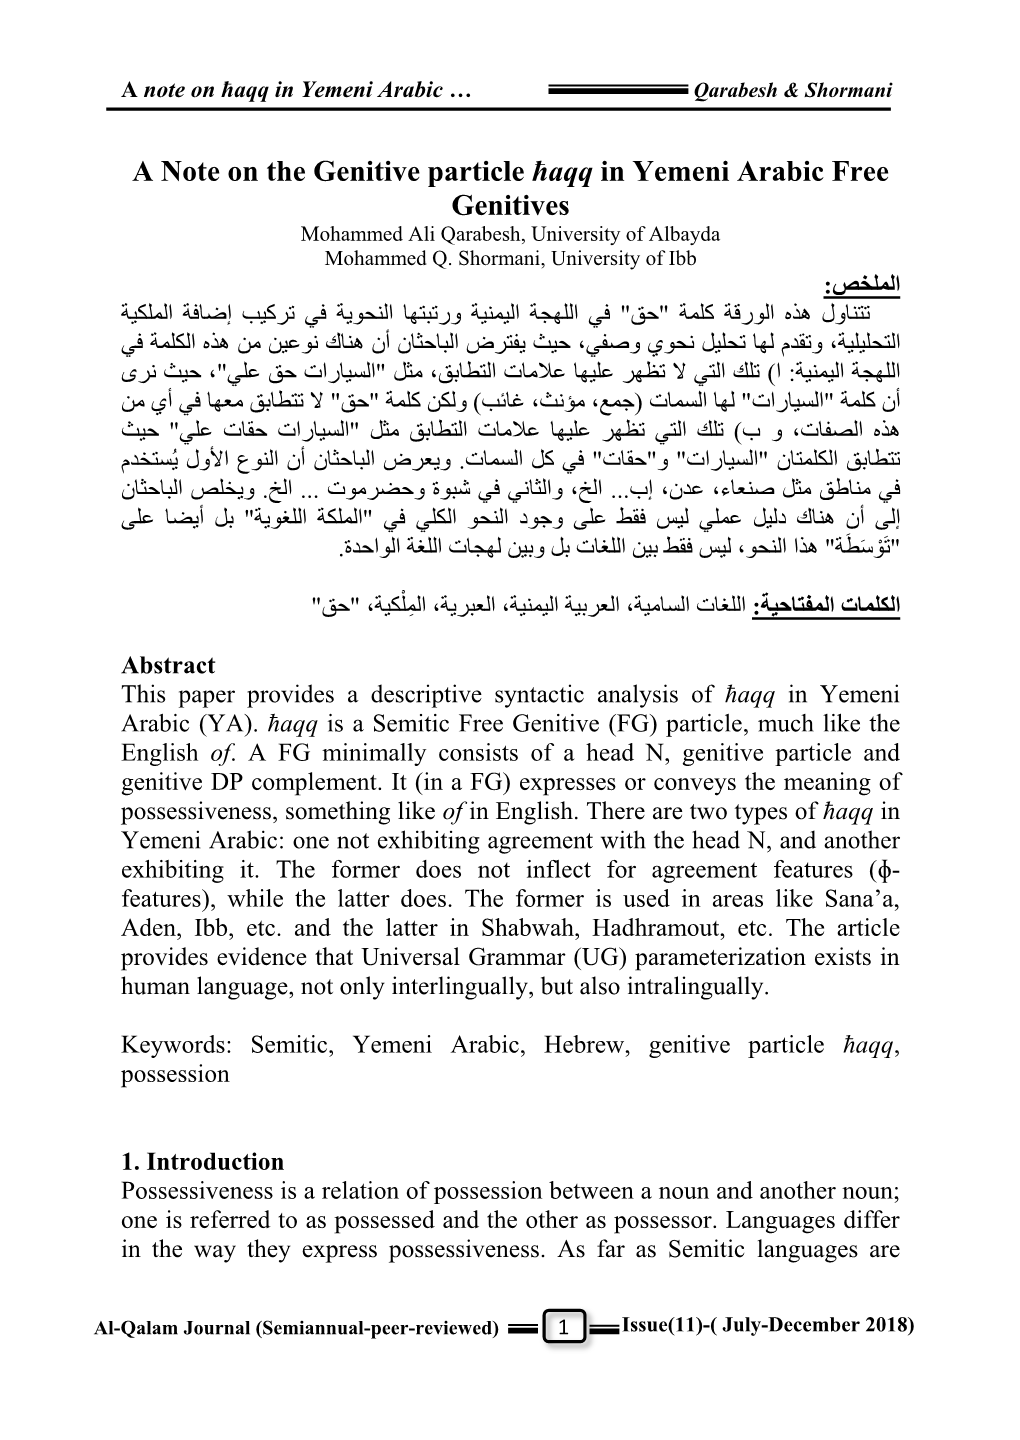 A Note on the Genitive Particle Ħaqq in Yemeni Arabic Free Genitives Mohammed Ali Qarabesh, University of Albayda Mohammed Q